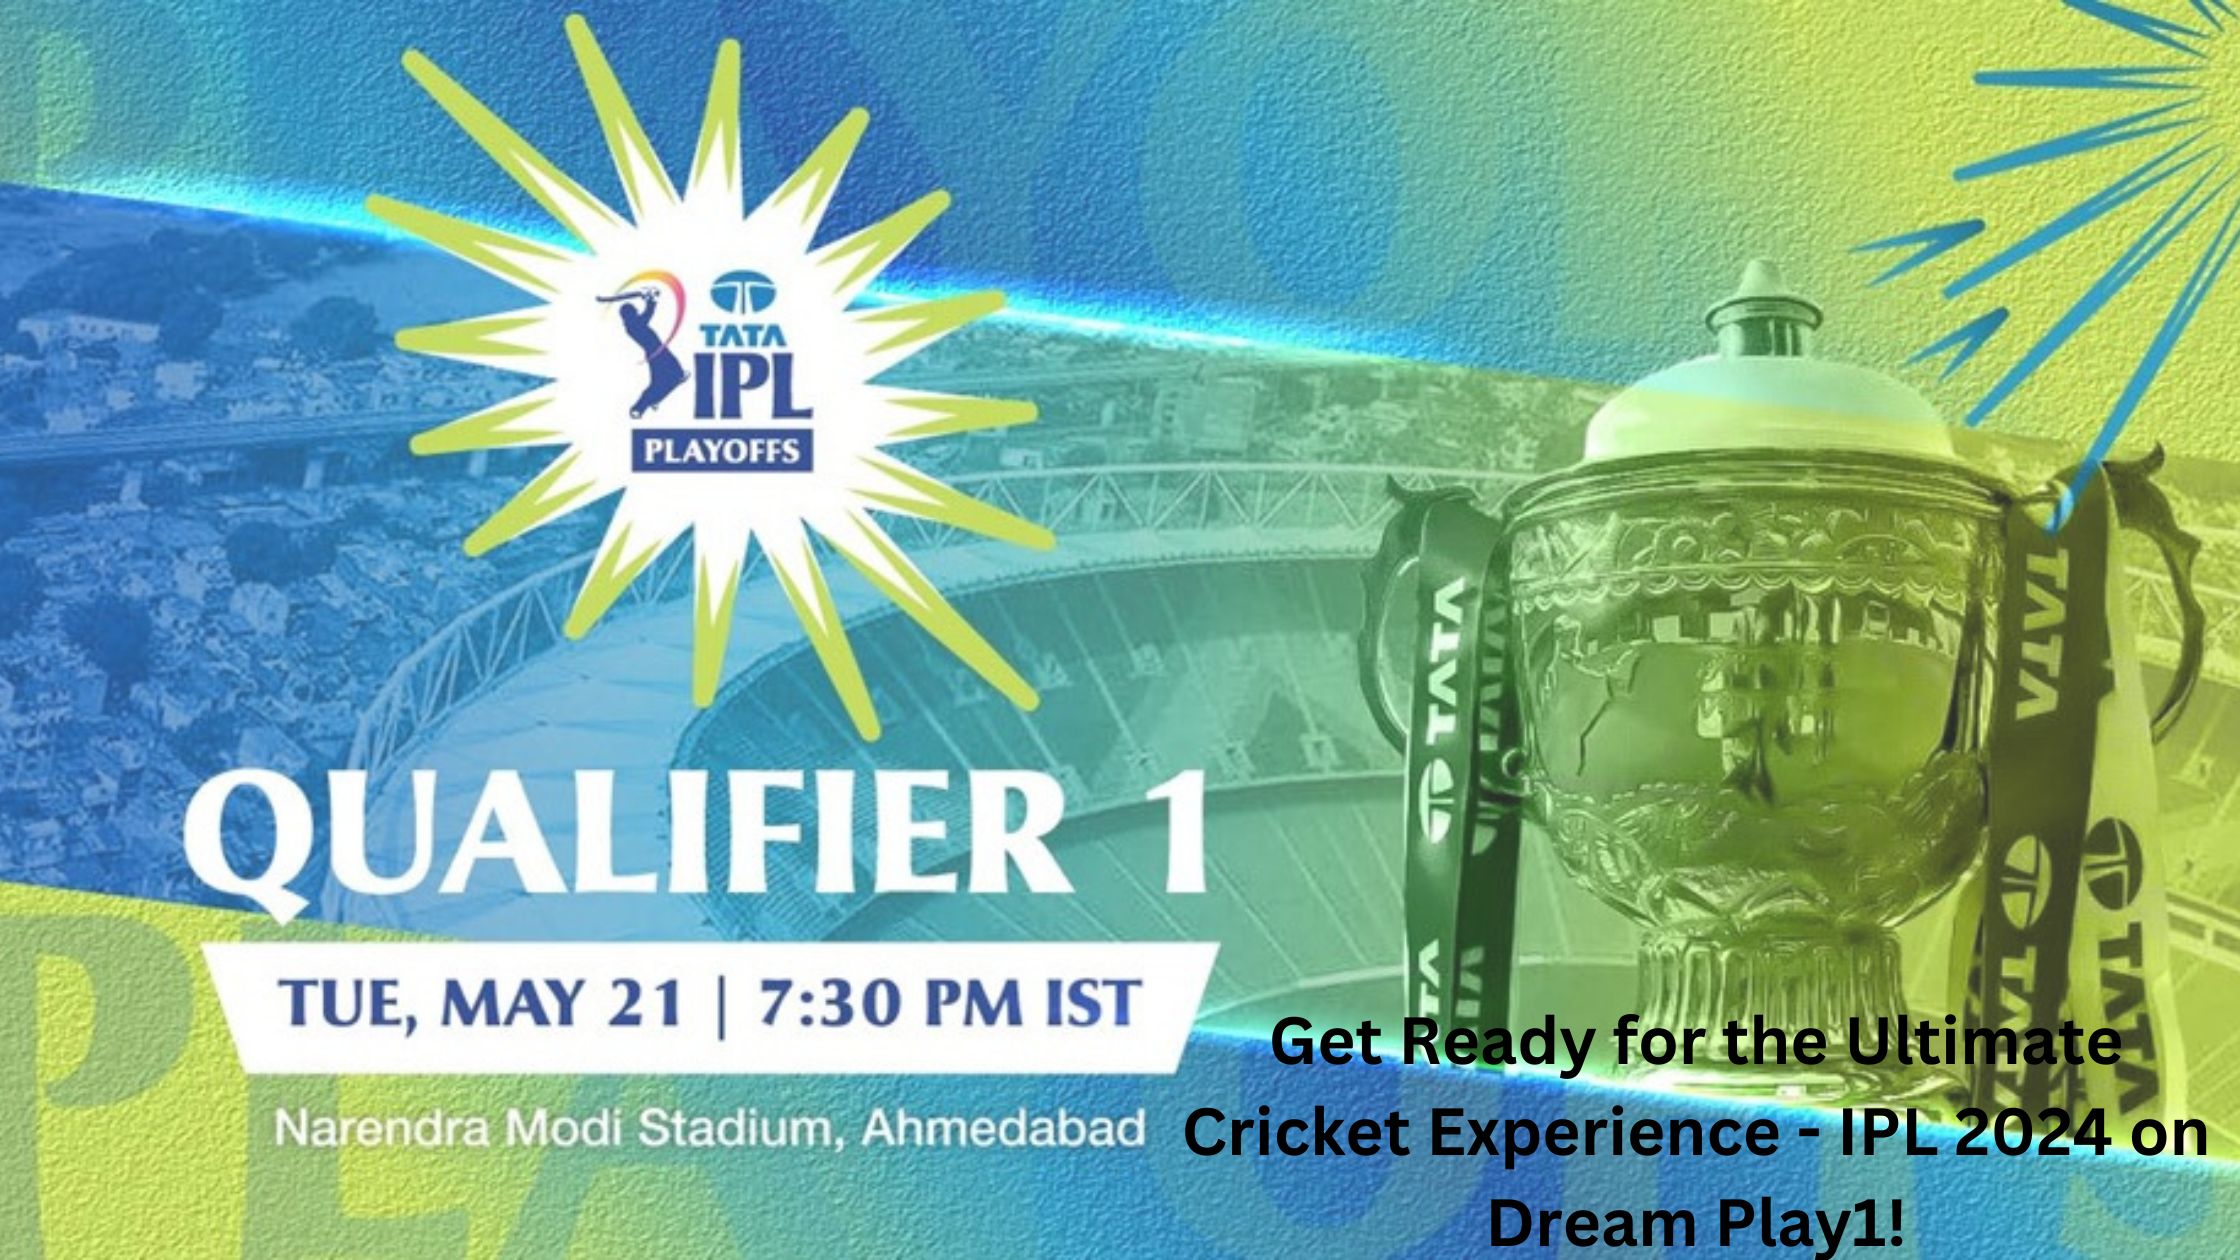 Get Ready for Ultimate Cricket Betting- IPL 2024 on Dream Play1!